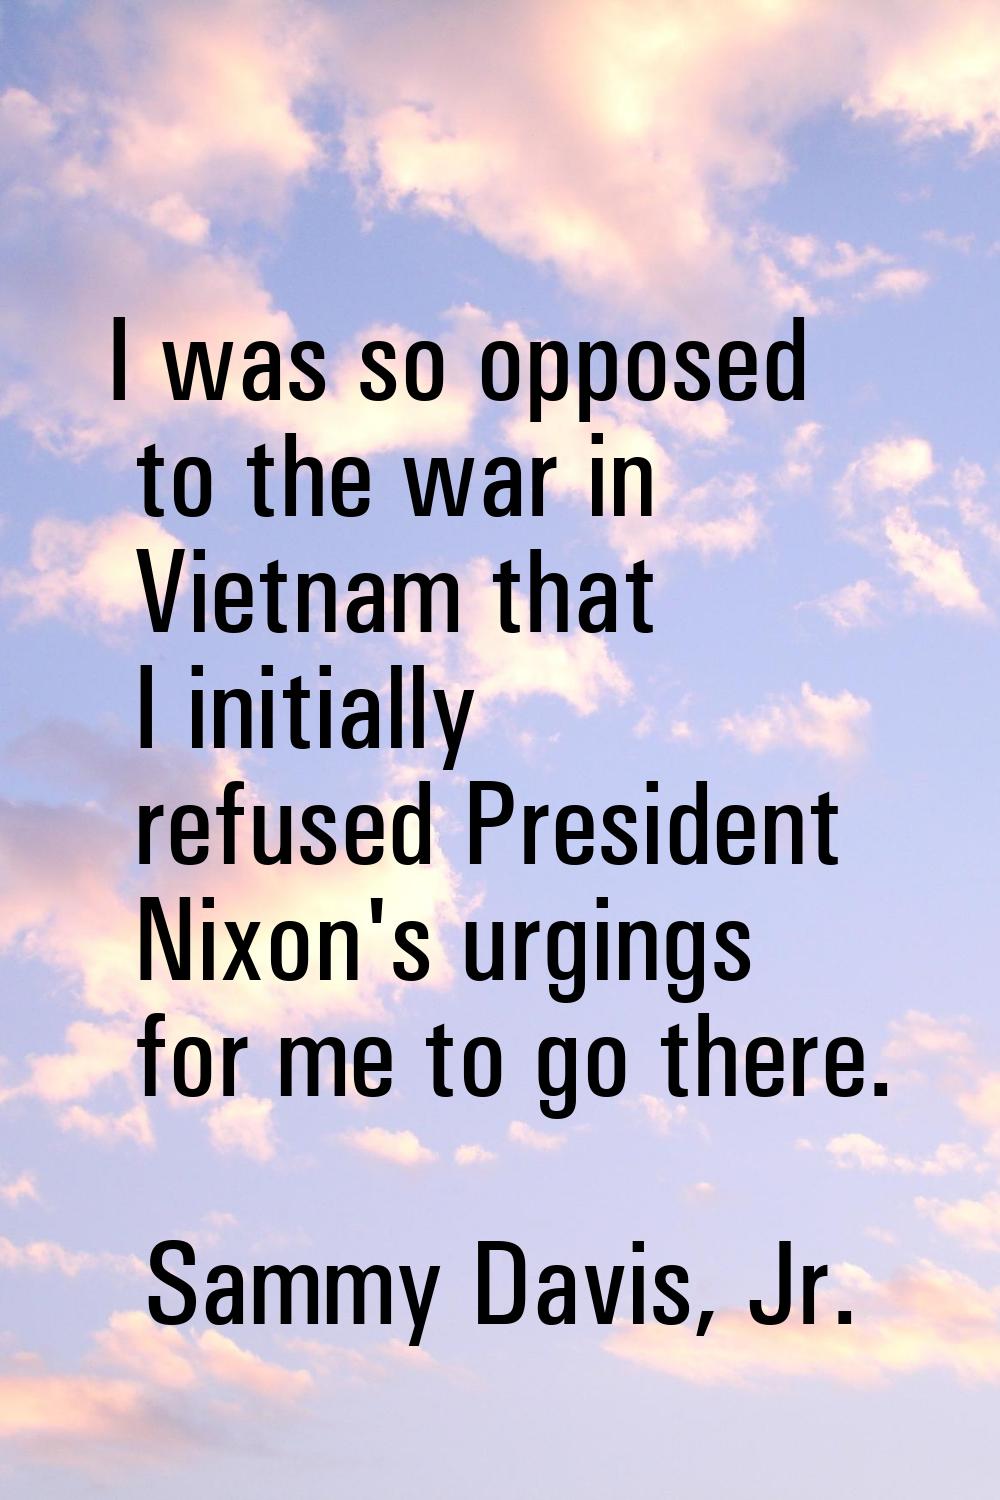 I was so opposed to the war in Vietnam that I initially refused President Nixon's urgings for me to